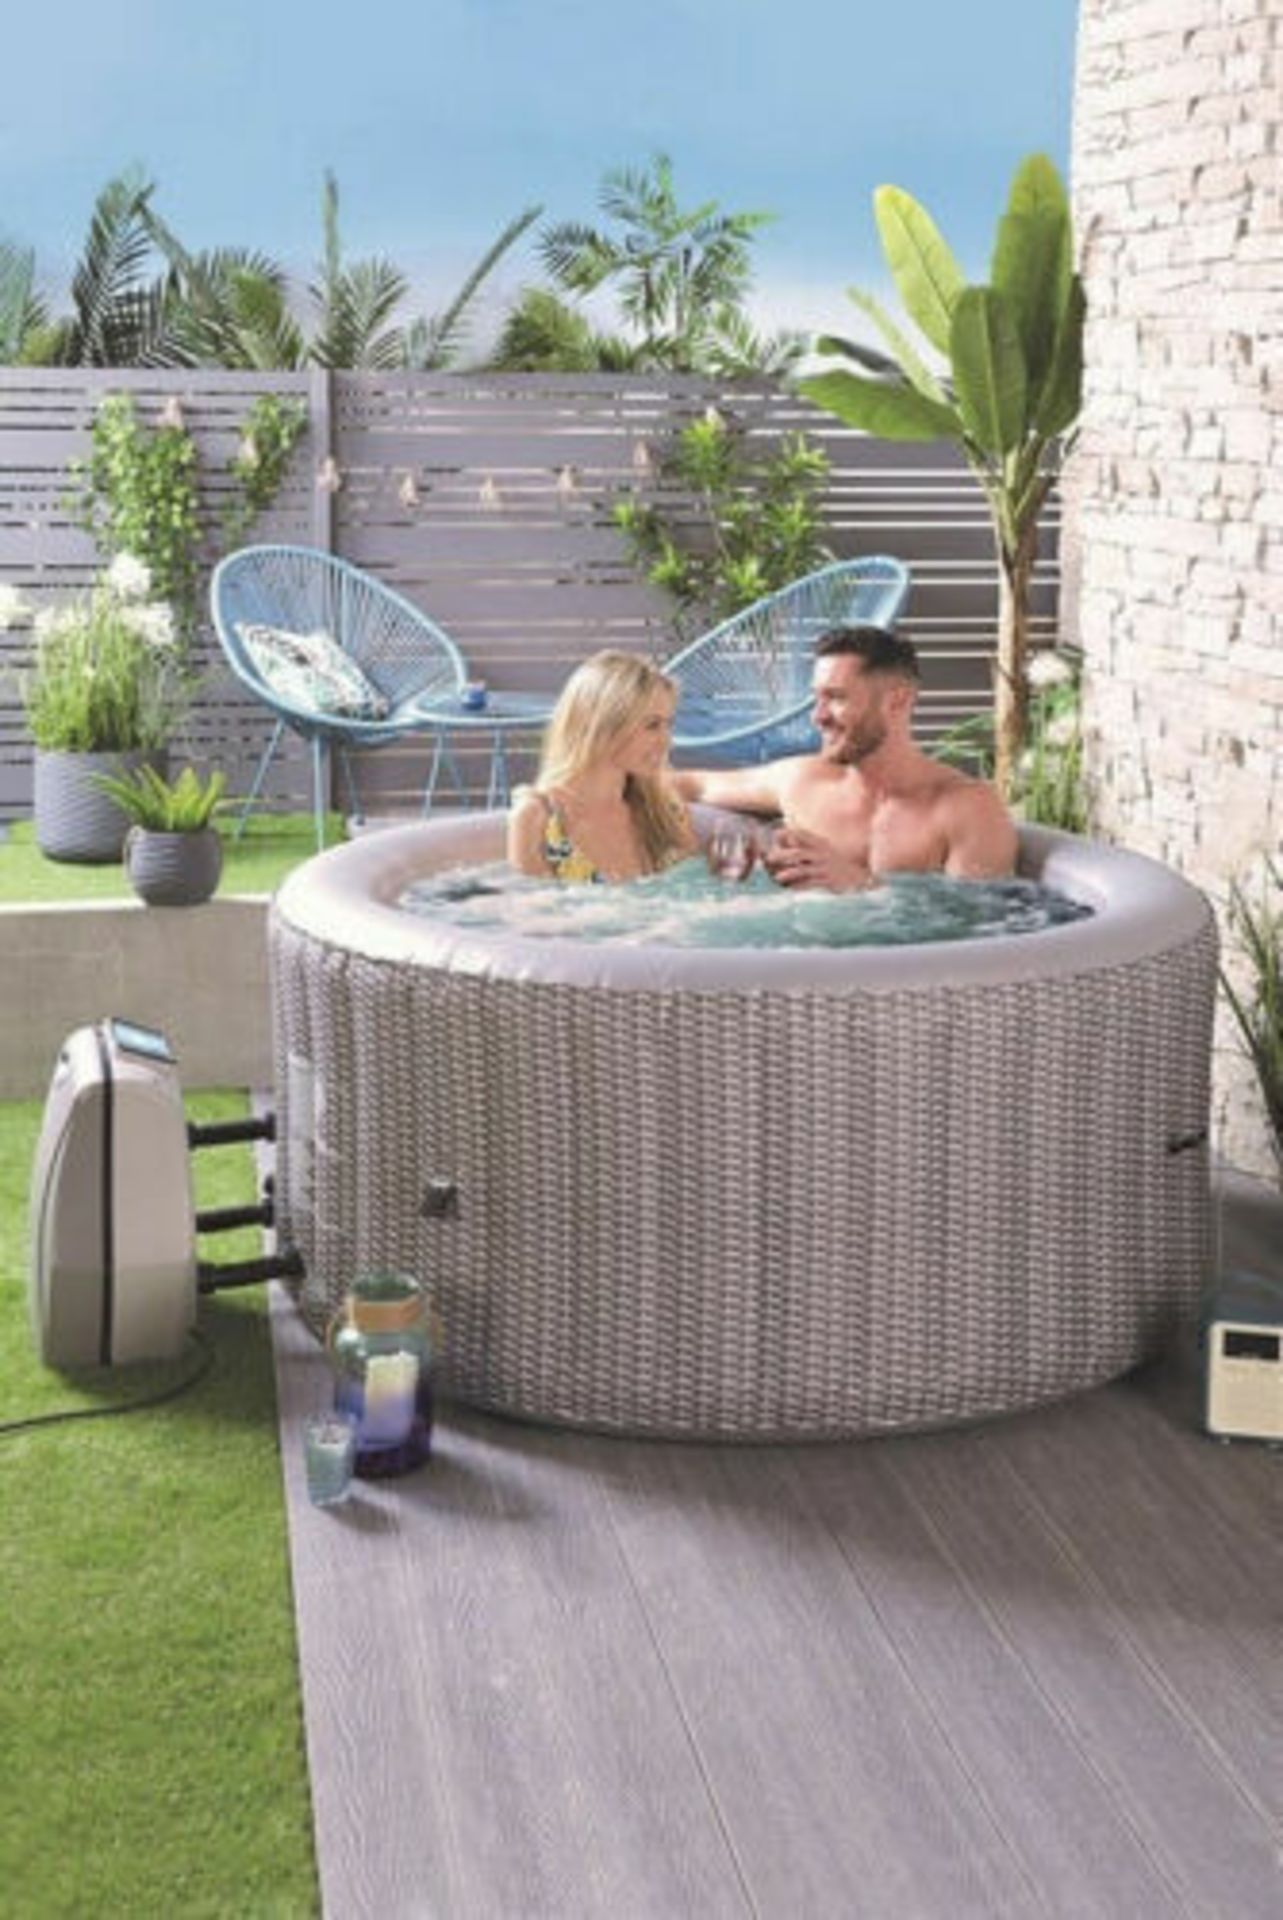 1 X STUDIO 4 SEATER ROUND RATTAN LAZY SPA WITH PUMP IN ORGINAL PACKAGING - BOX SIZE - 58 X 51 X 57.5